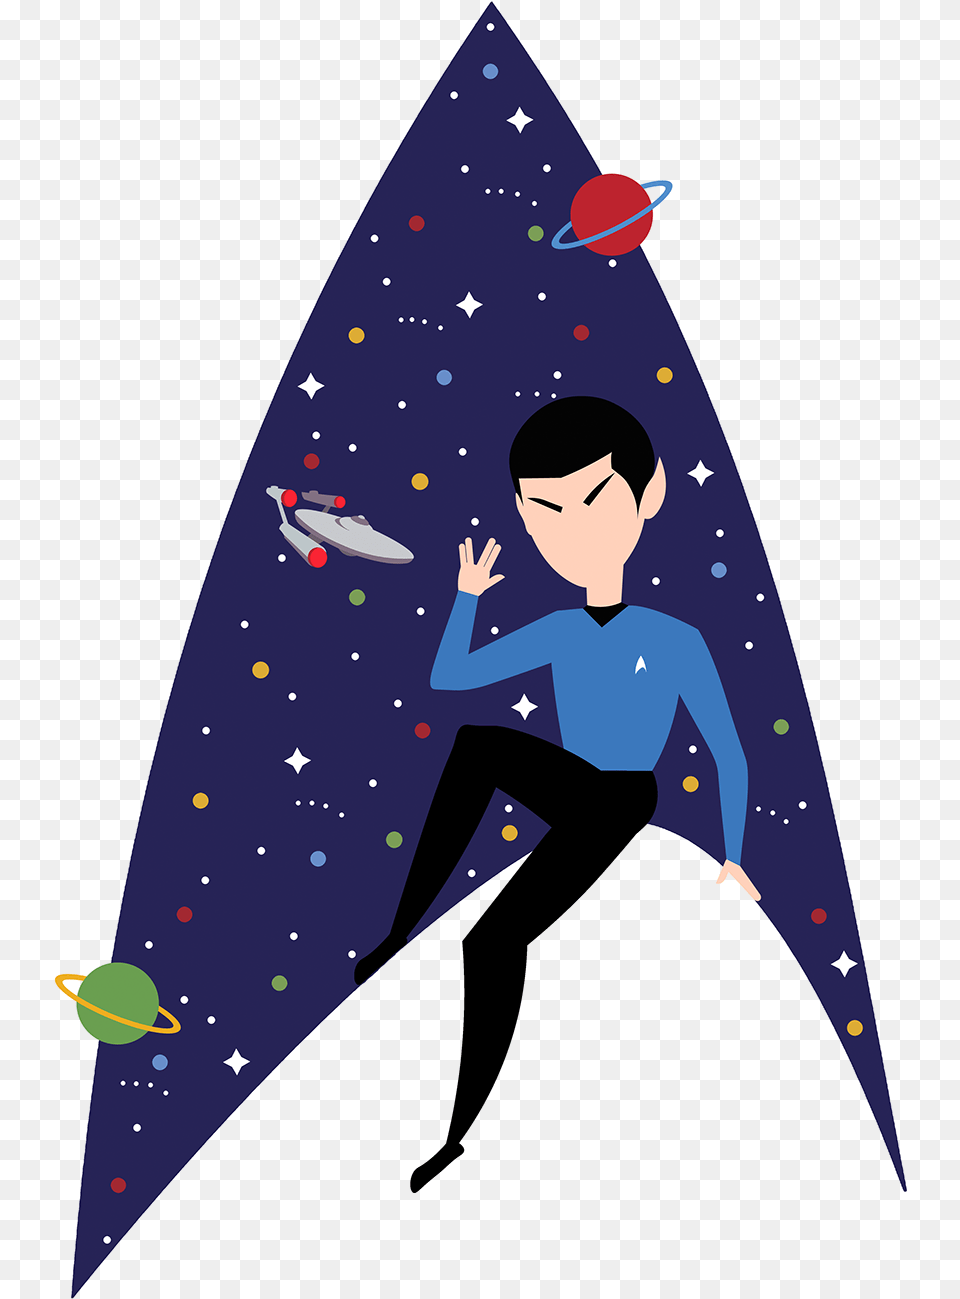 Star Trek Sign Up To Join The Conversation Cartoon Fictional Character, Art, Graphics, Baby, Person Png